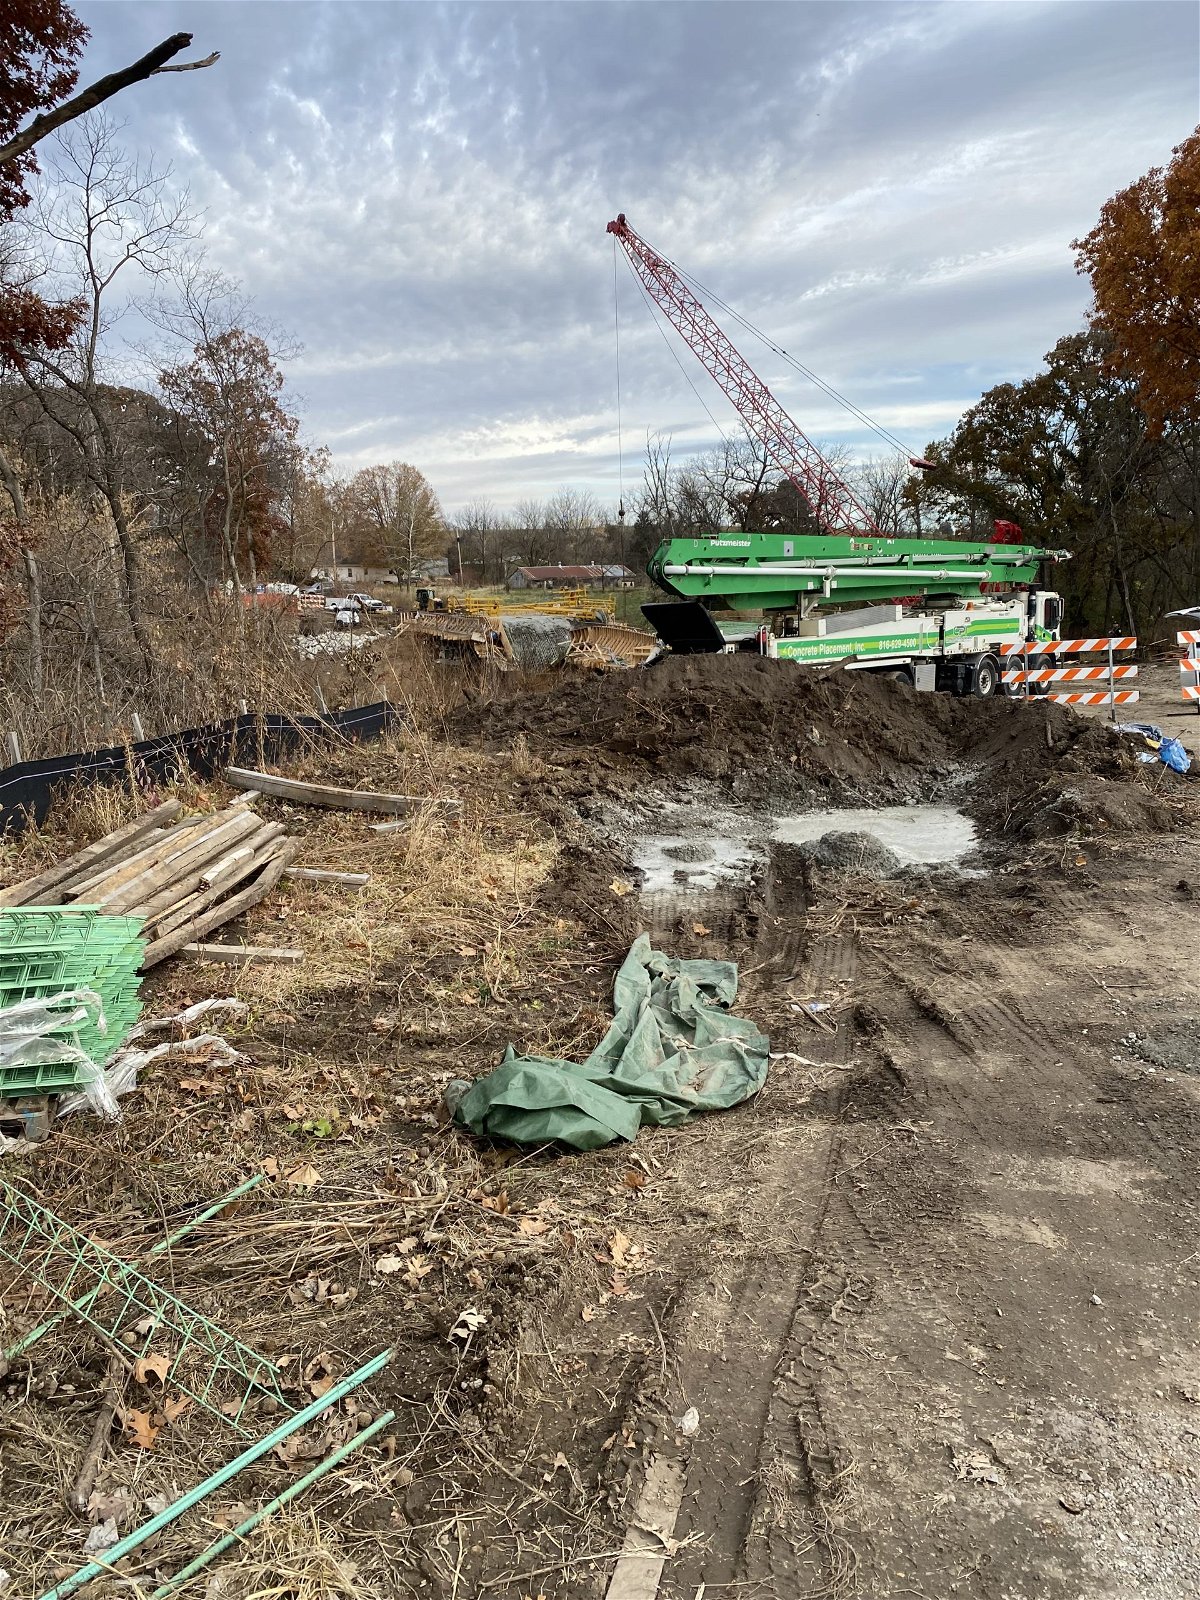 A bridge collapsed during construction in Clay County on Oct. 26, 2022. The construction company, Lehman Construction, was fined by OSHA in May over the collapse that killed one and hurt three others.